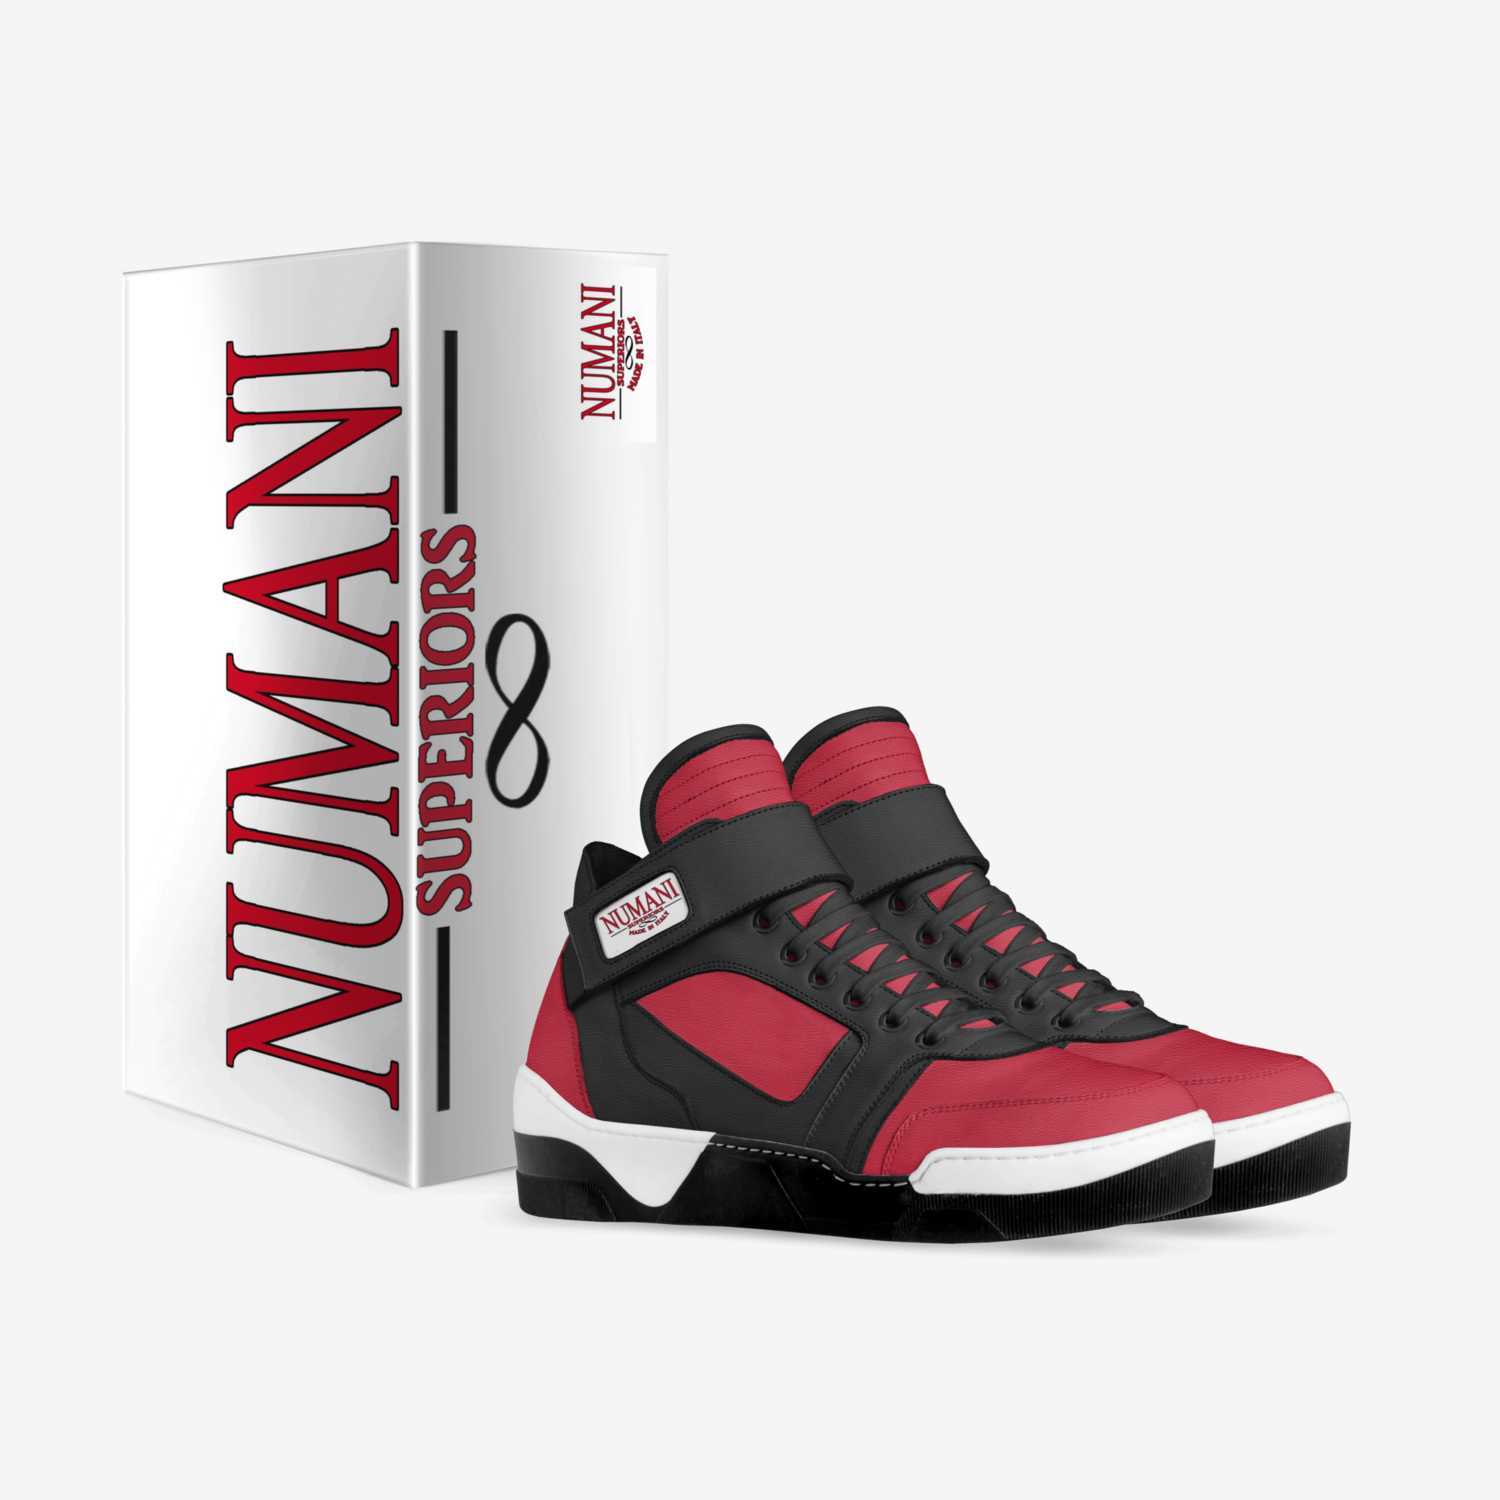 NUMANI SUPERIORS custom made in Italy shoes by Numani Clothing & Co. | Box view